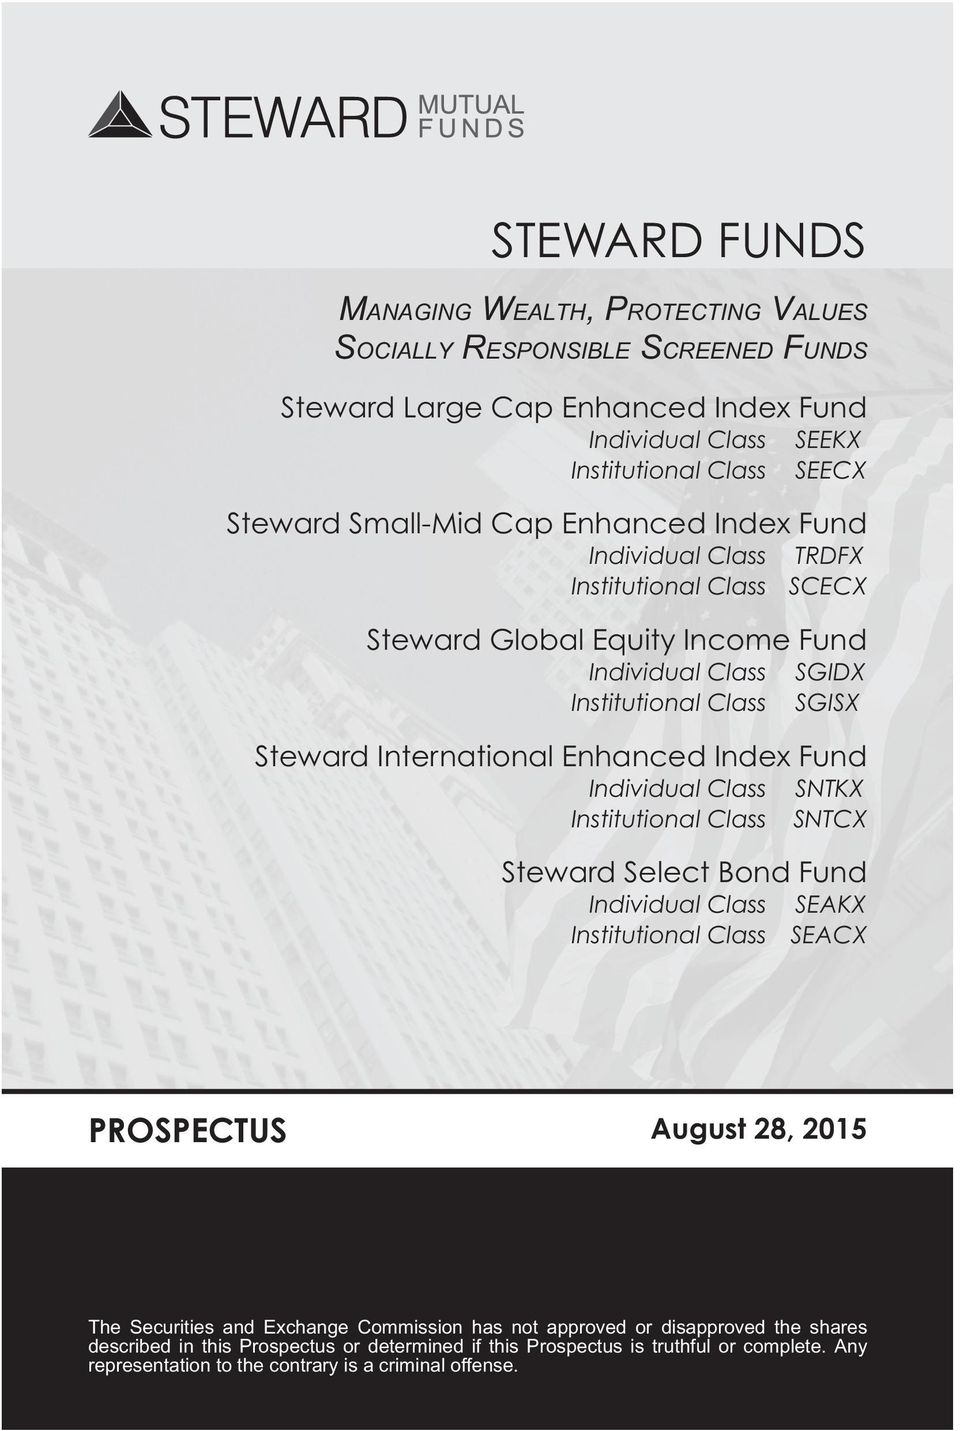 Index Fund Individual Class SNTKX Institutional Class SNTCX Steward Select Bond Fund Individual Class SEAKX Institutional Class SEACX PROSPECTUS August 28, 2015 The Securities and Exchange